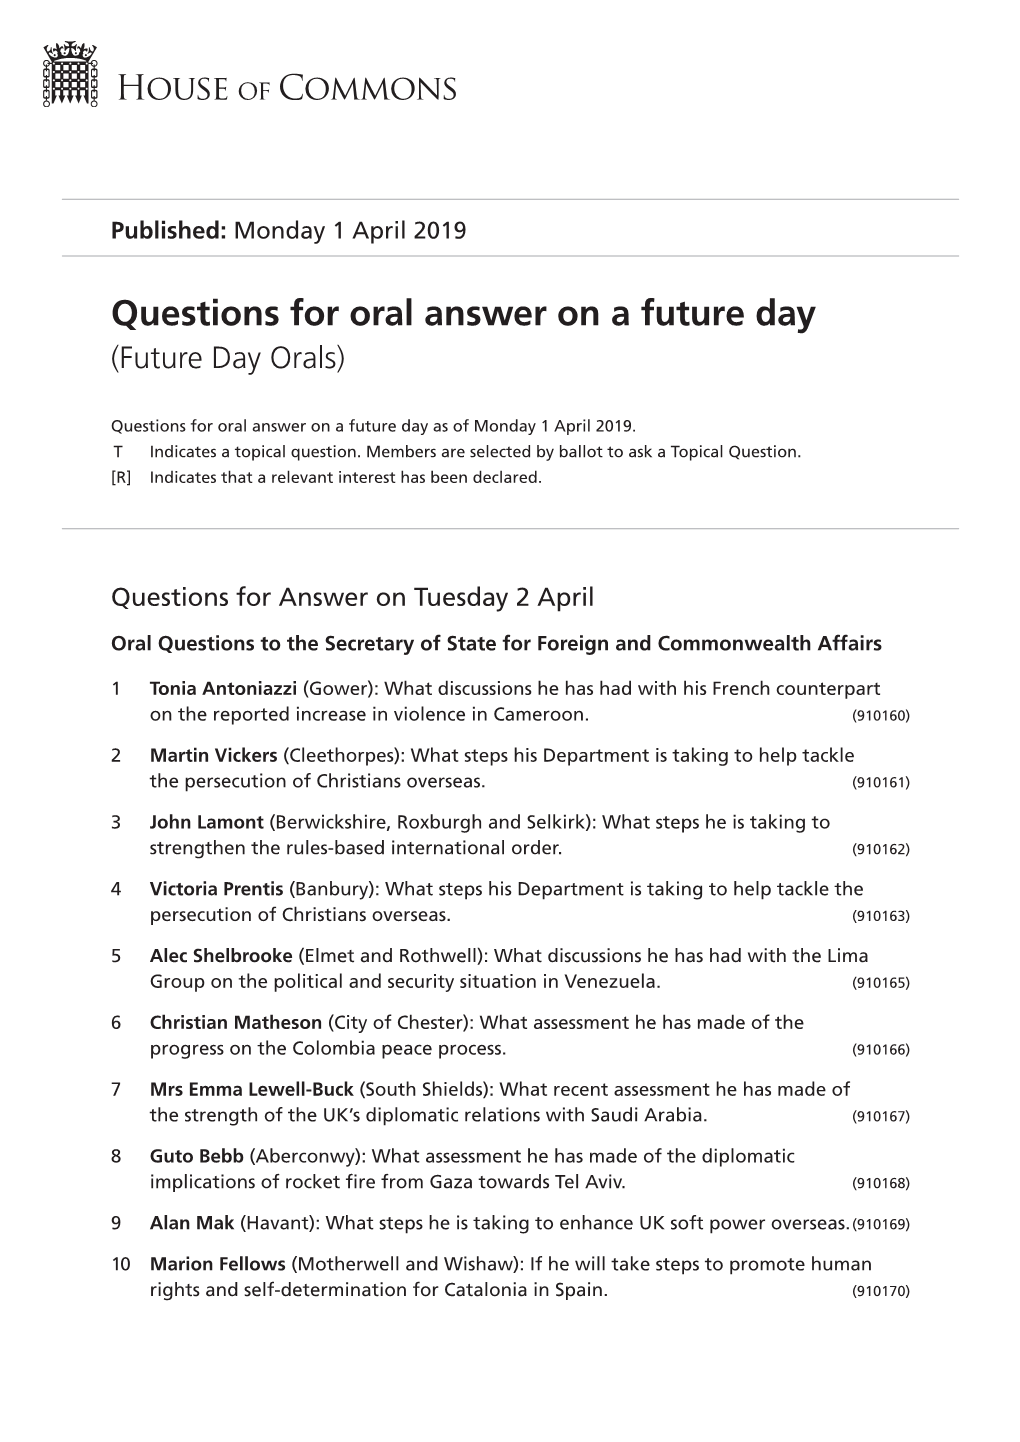 Future Oral Questions As of Mon 1 Apr 2019